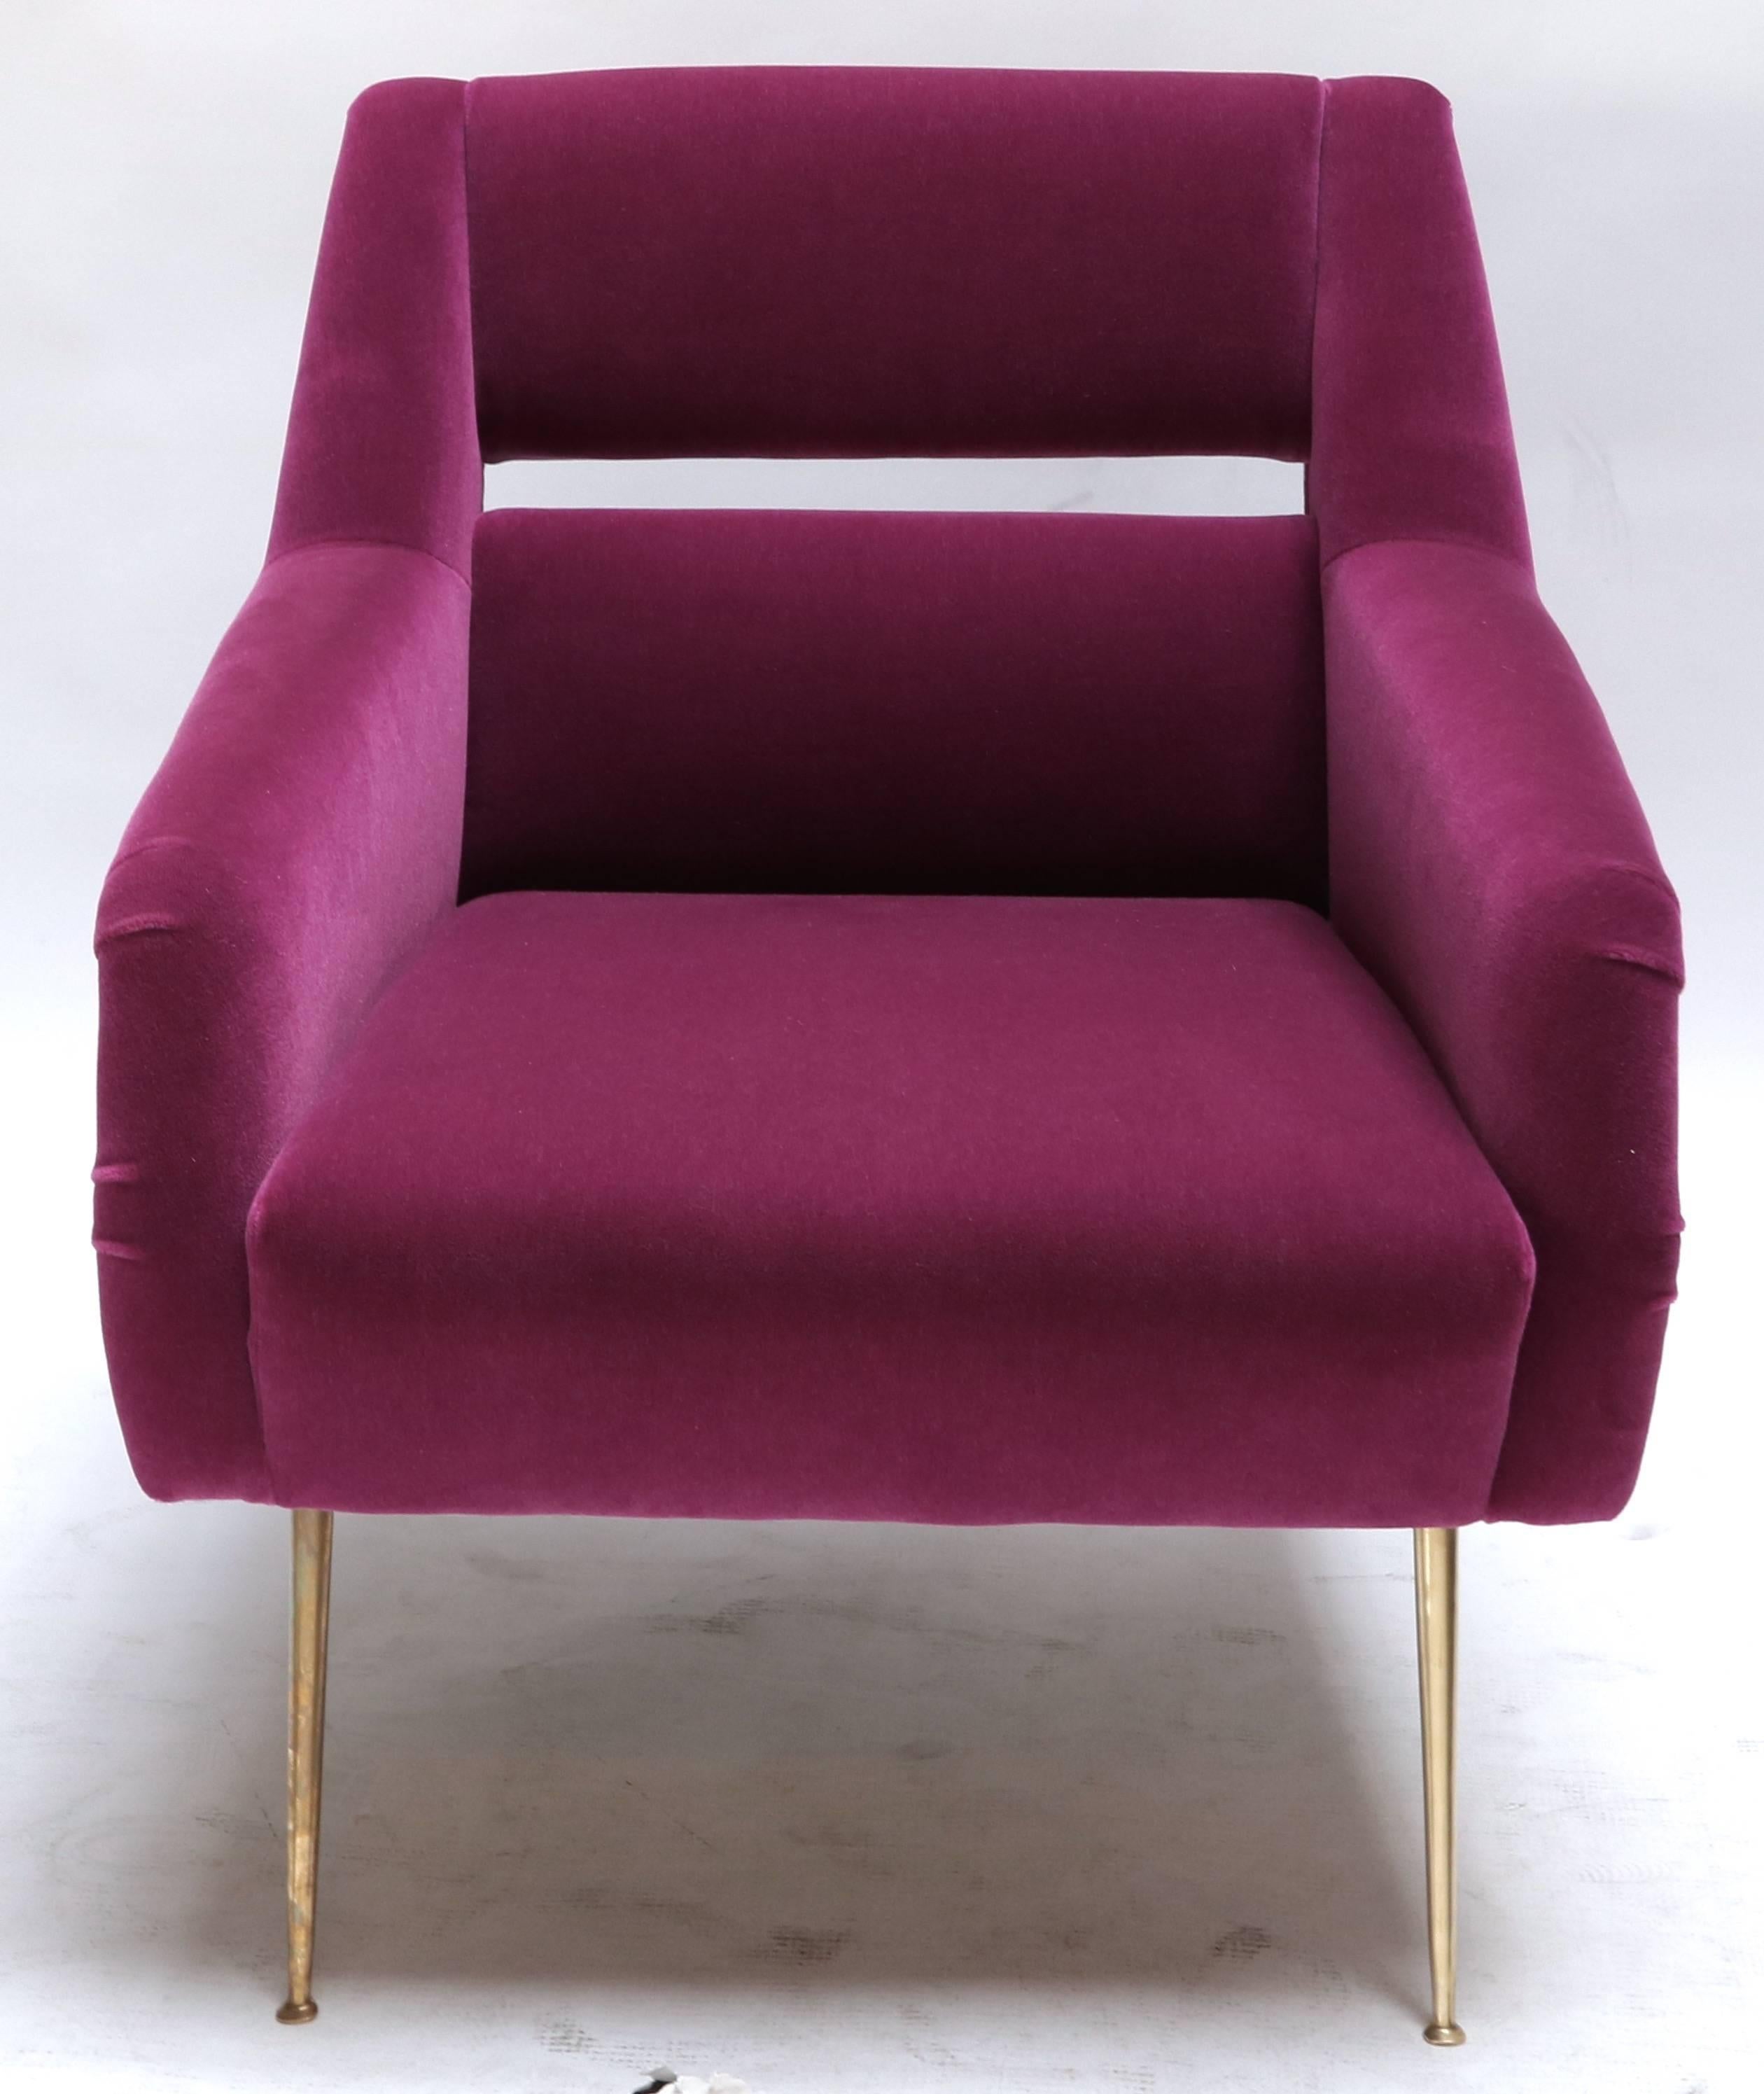 Custom 1960s Italian style armchairs with brass legs and upholstered in fuchsia mohair.  Made in Los Angeles by Adesso Imports. Can be done in other fabrics and colors.